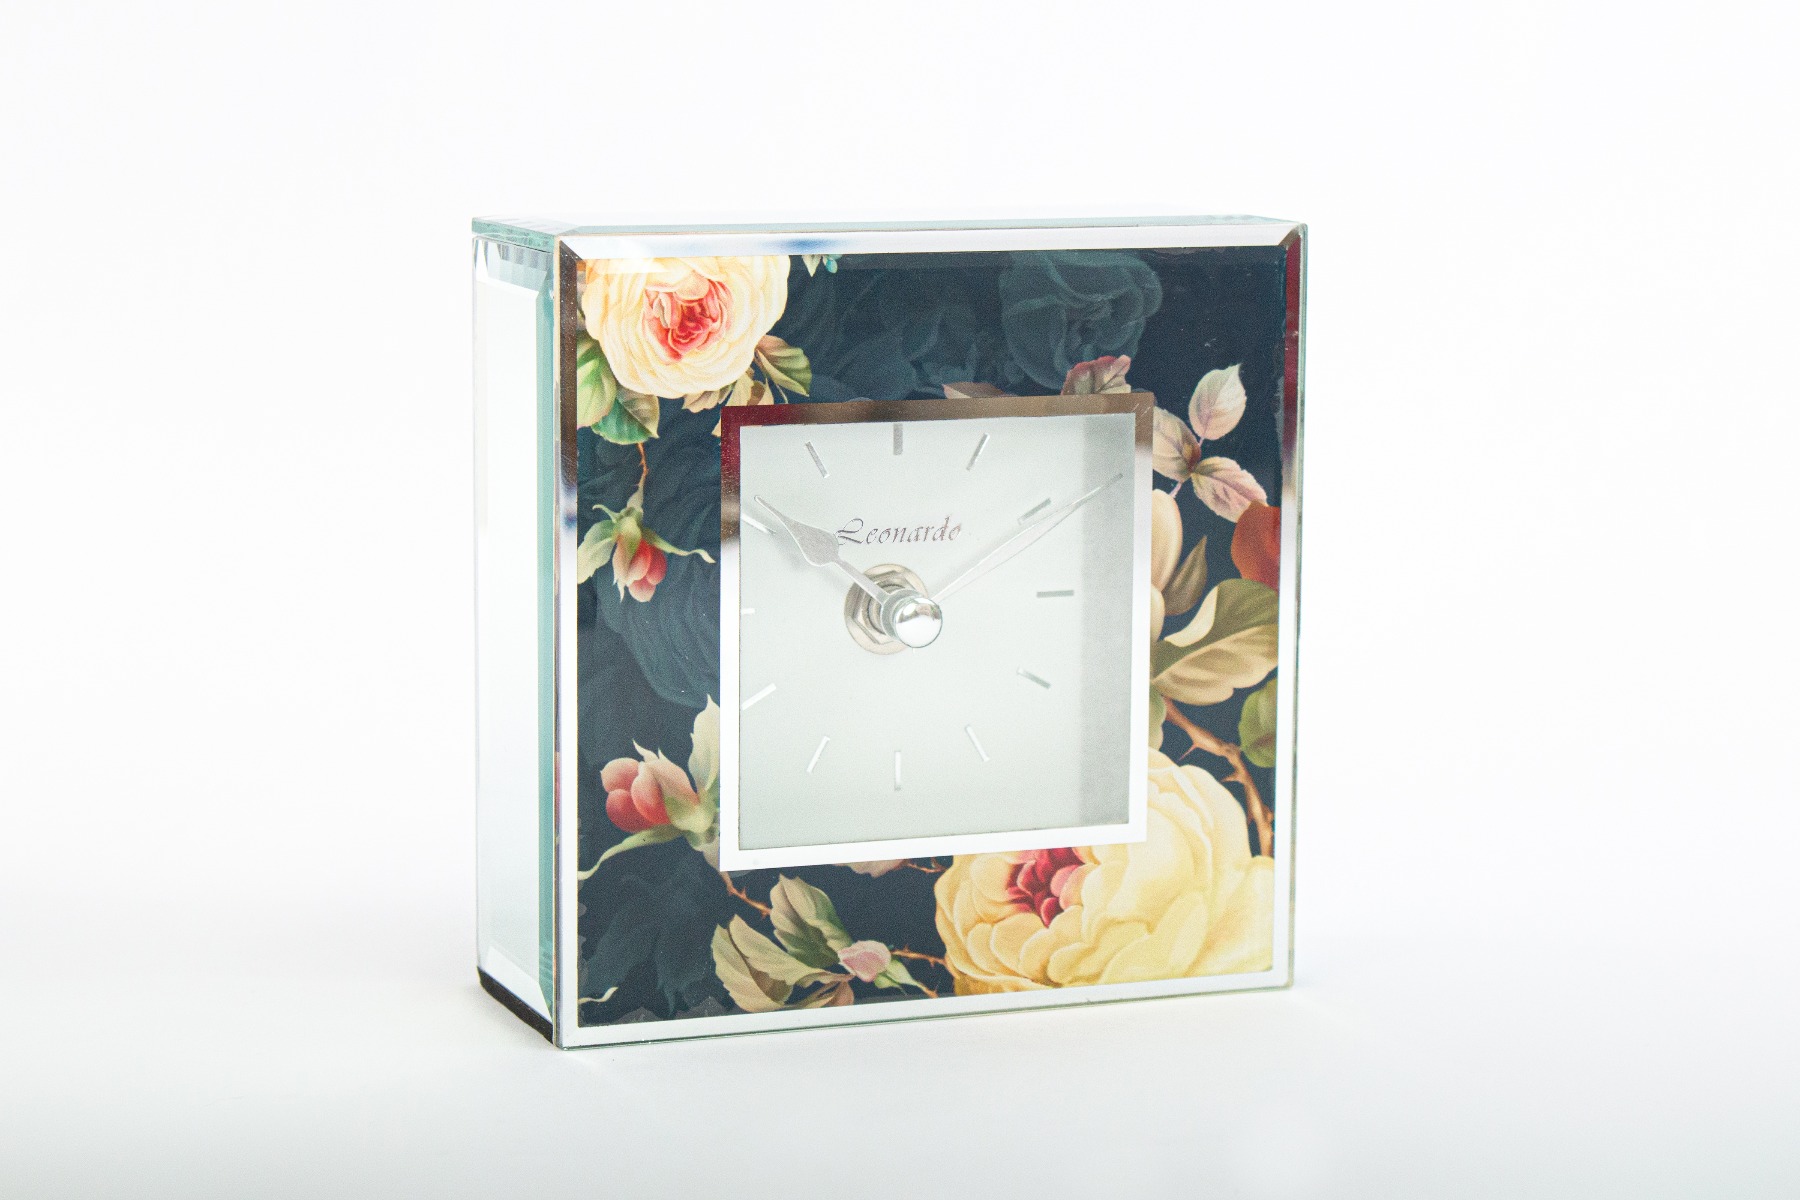 A clock with a floral design.